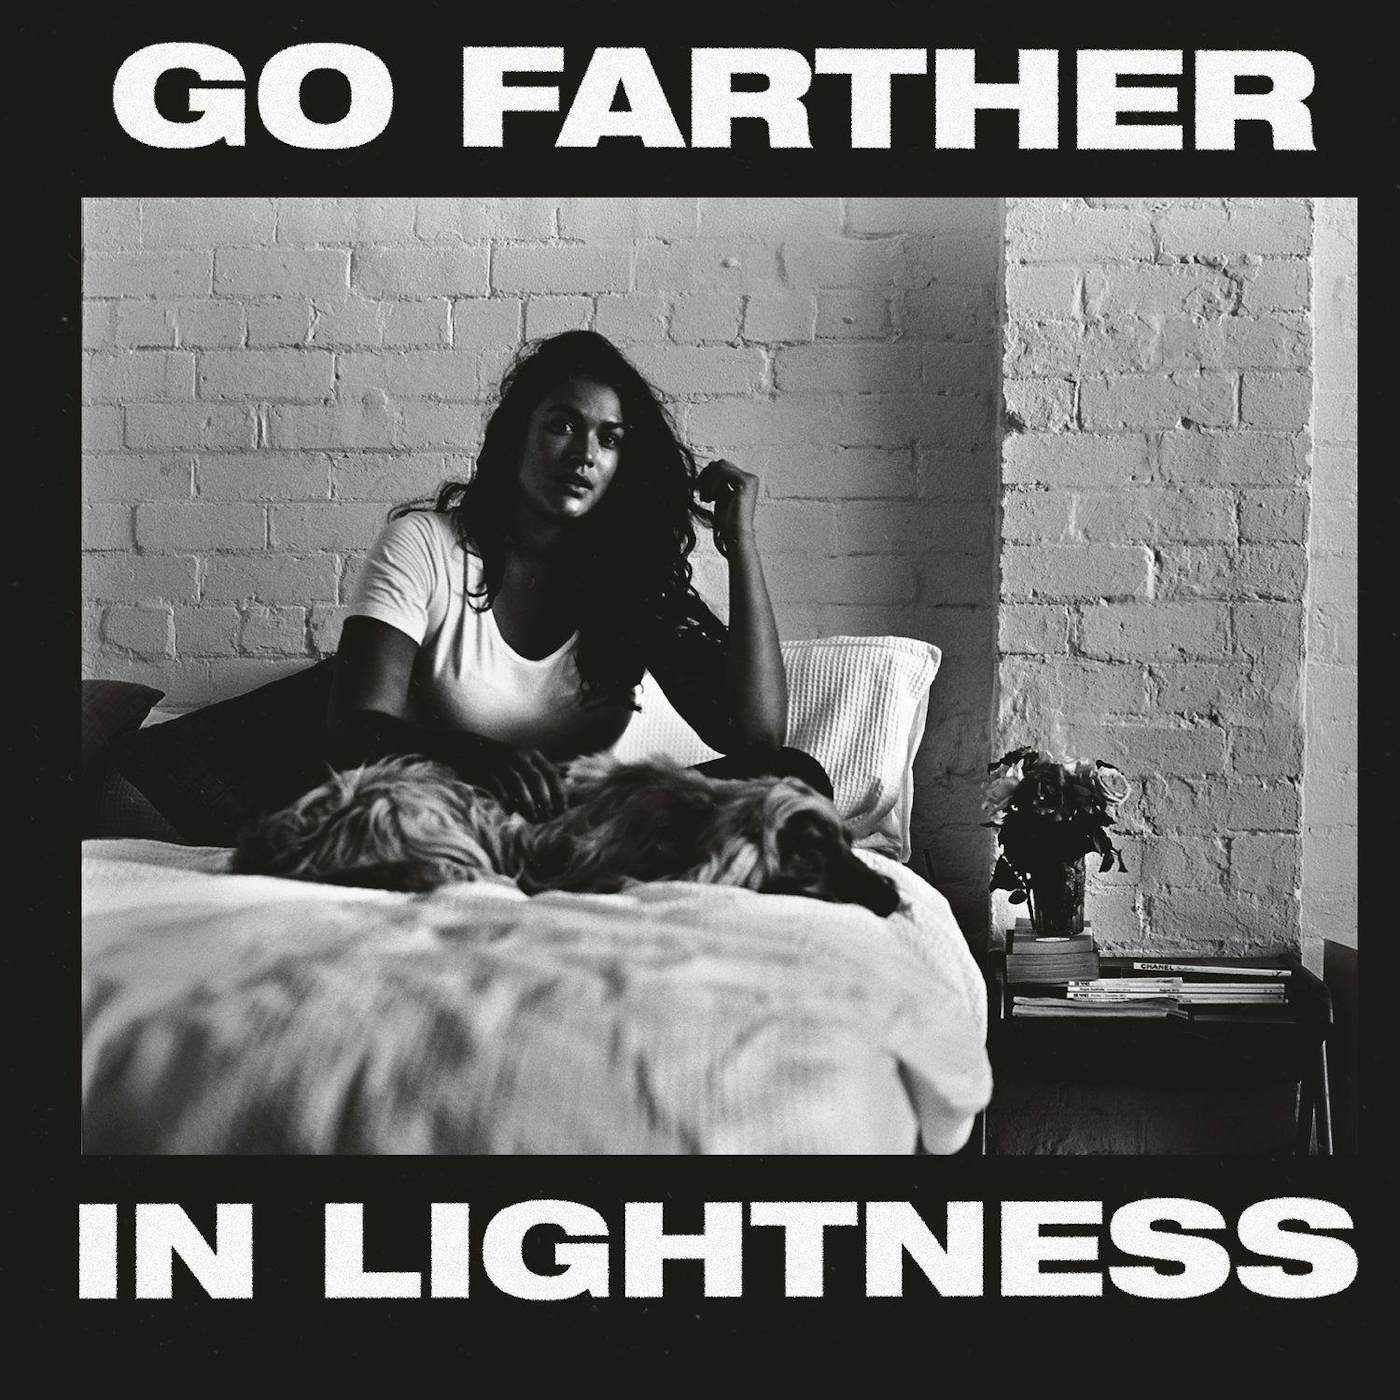 Gang of Youths Go Farther In Lightness (2 LP/150g/Translucent White With Black Swirls) Vinyl Record